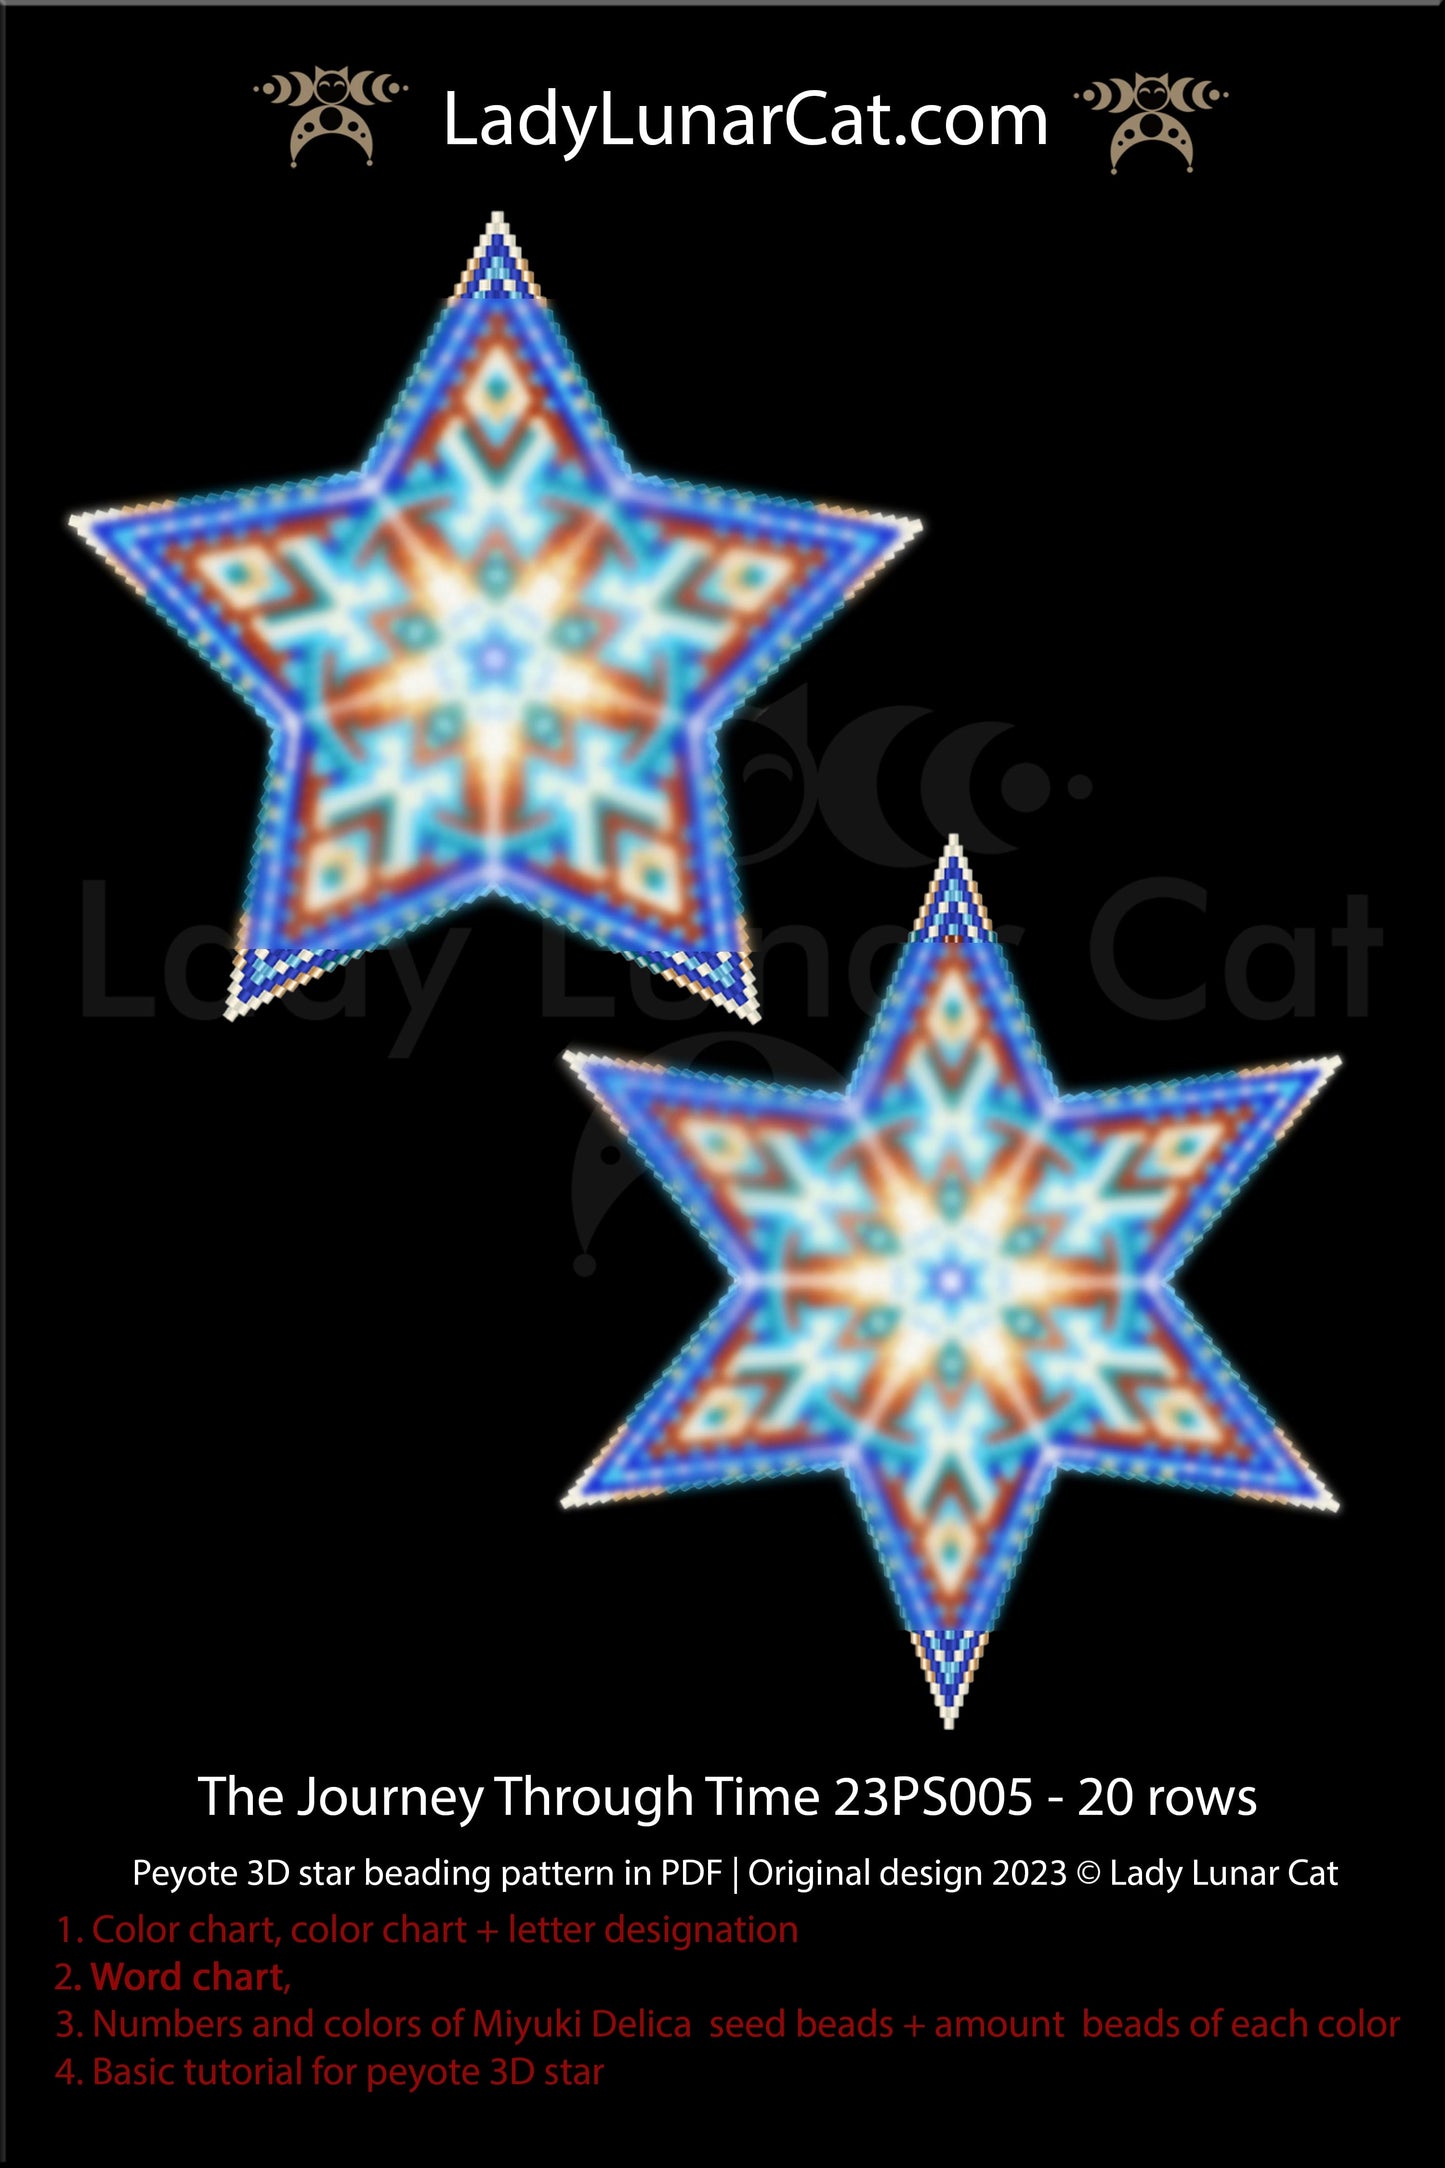 Copy of Peyote star pattern for beading - The Journey Through Time 23PS005 20 rows LadyLunarCat